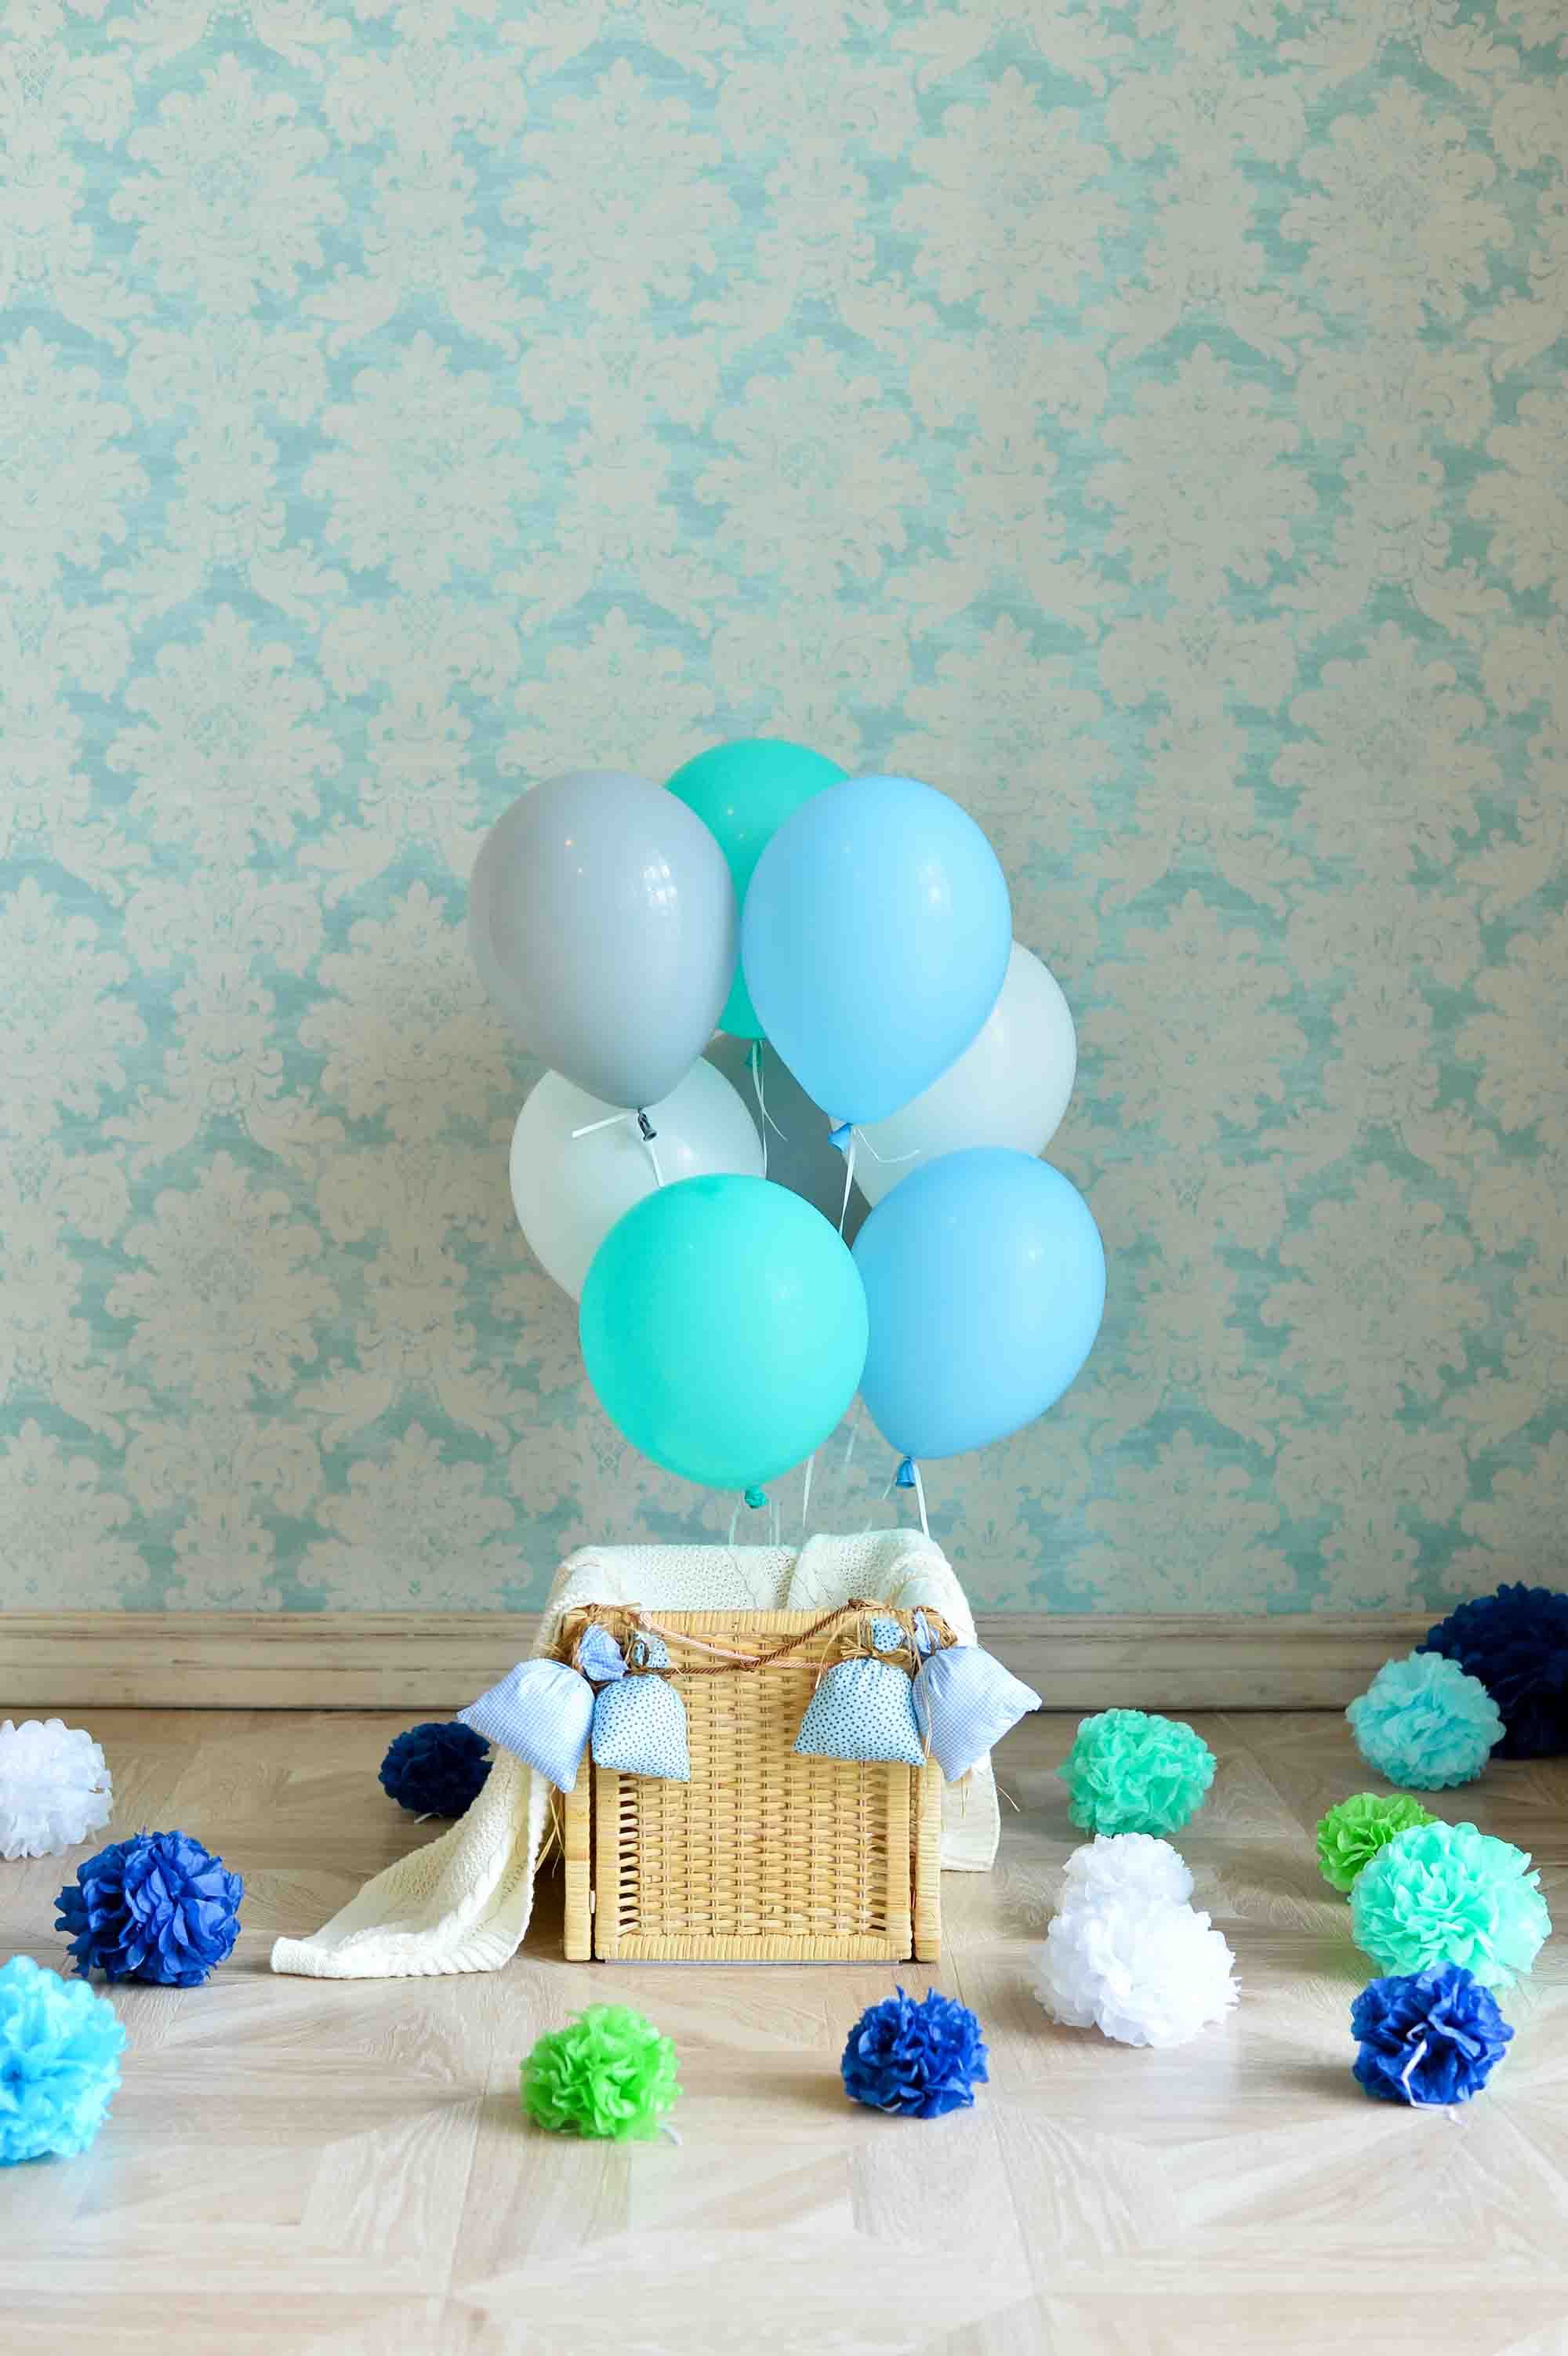 Blue Balloons Before Patterns Wall With Floor For Kid Backdrop For Photography Shopbackdrop